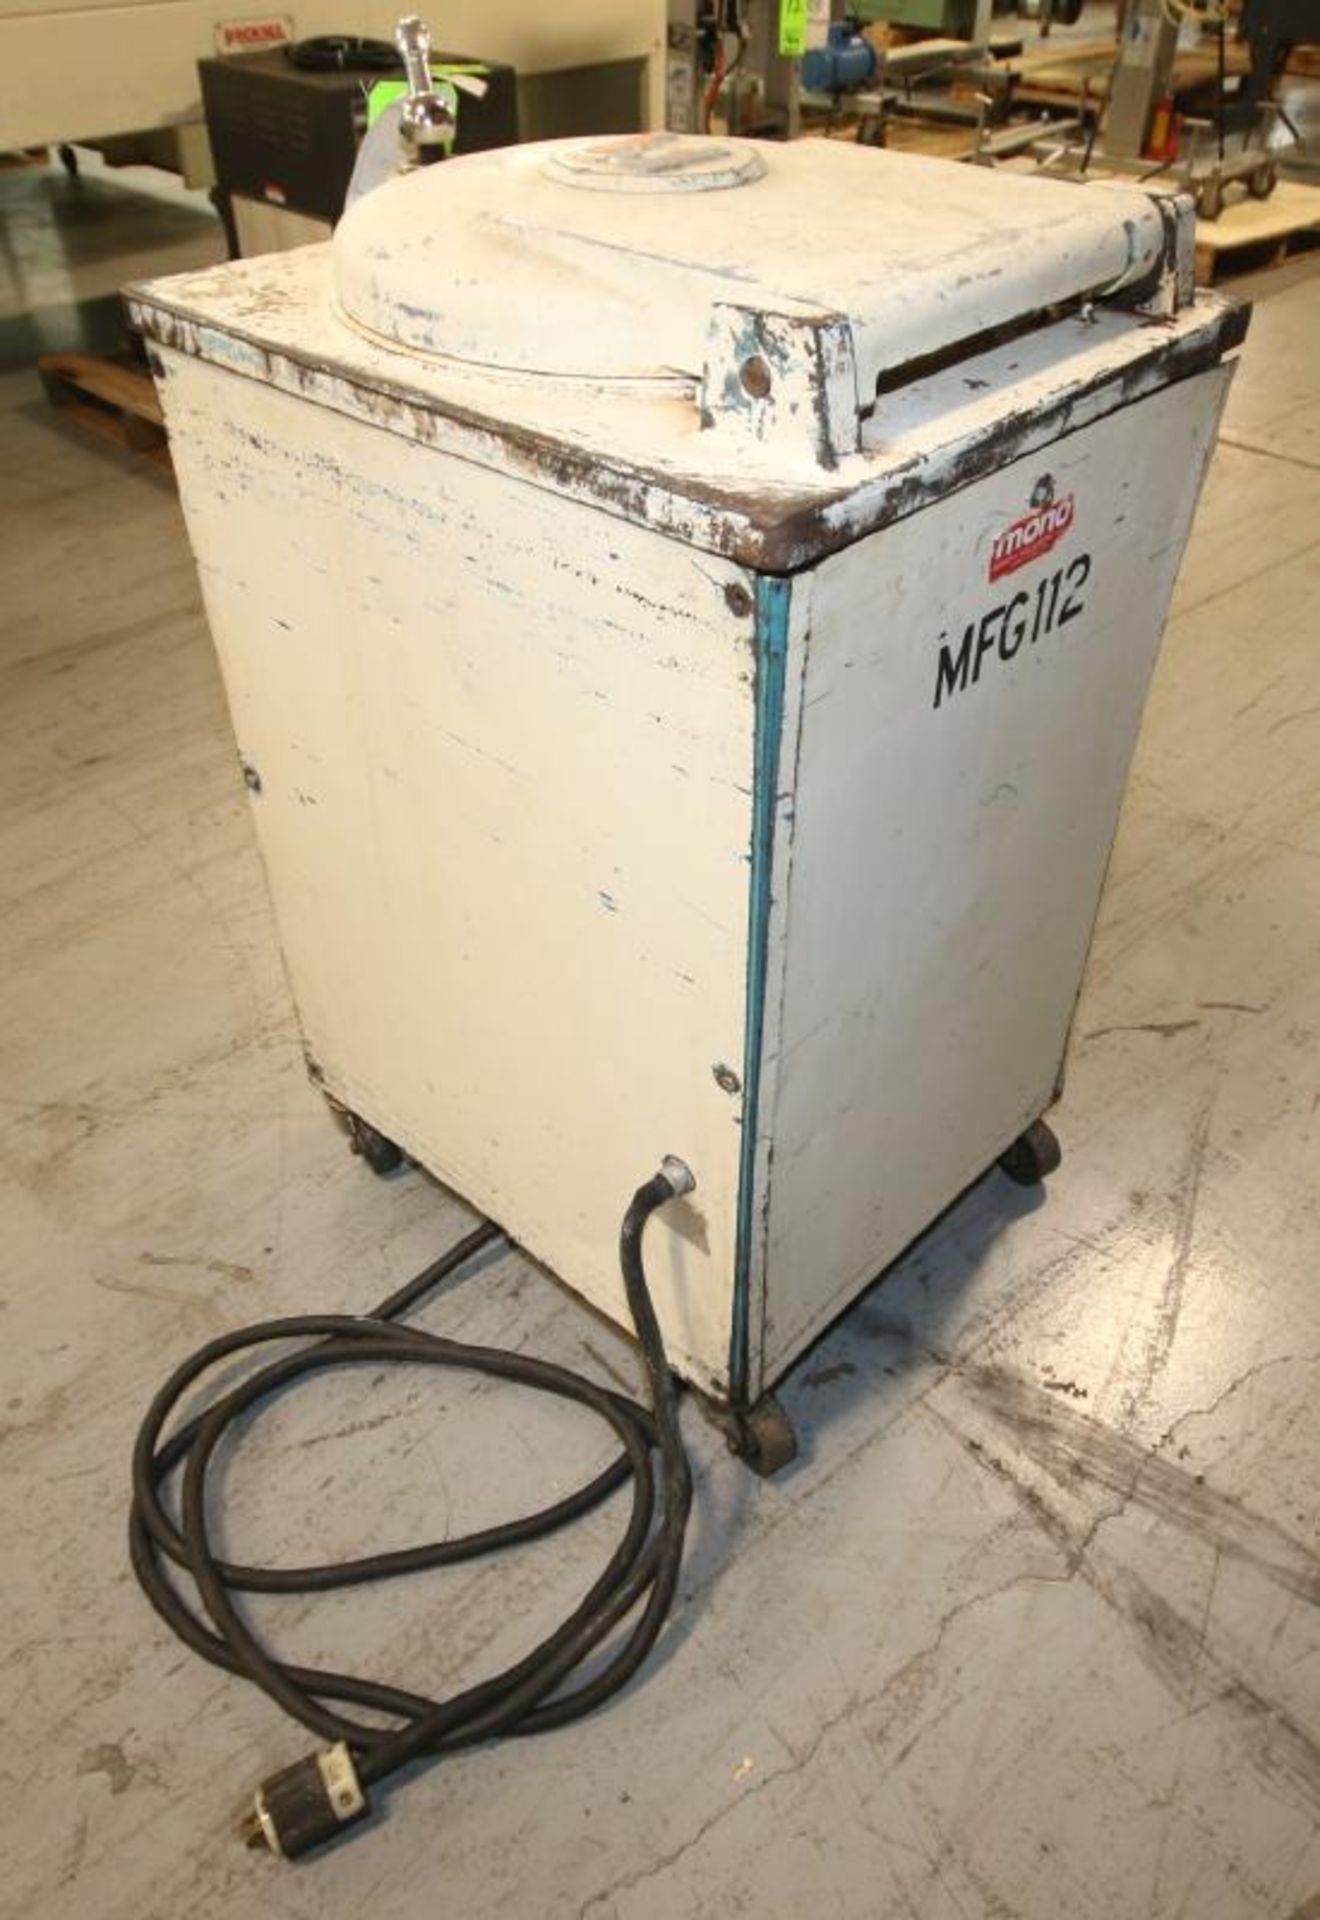 Mono Bakery Equipment Dough Molder, Model MFG112 (Located at the MDG Showroom in Pittsburgh, PA) - Image 3 of 5